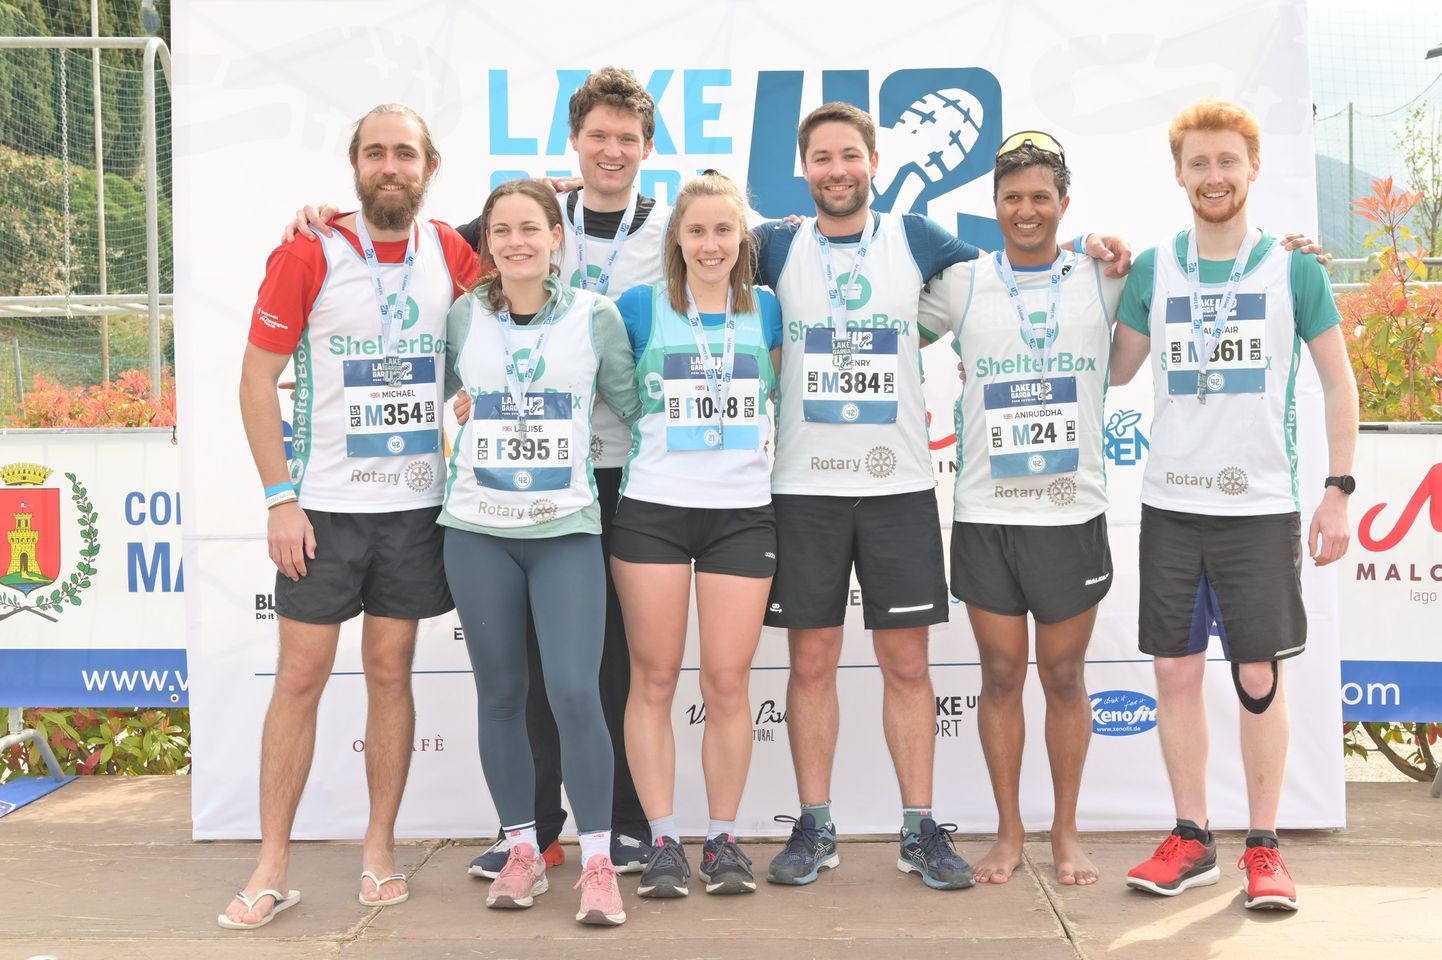 A group of people posing together before running a marathon